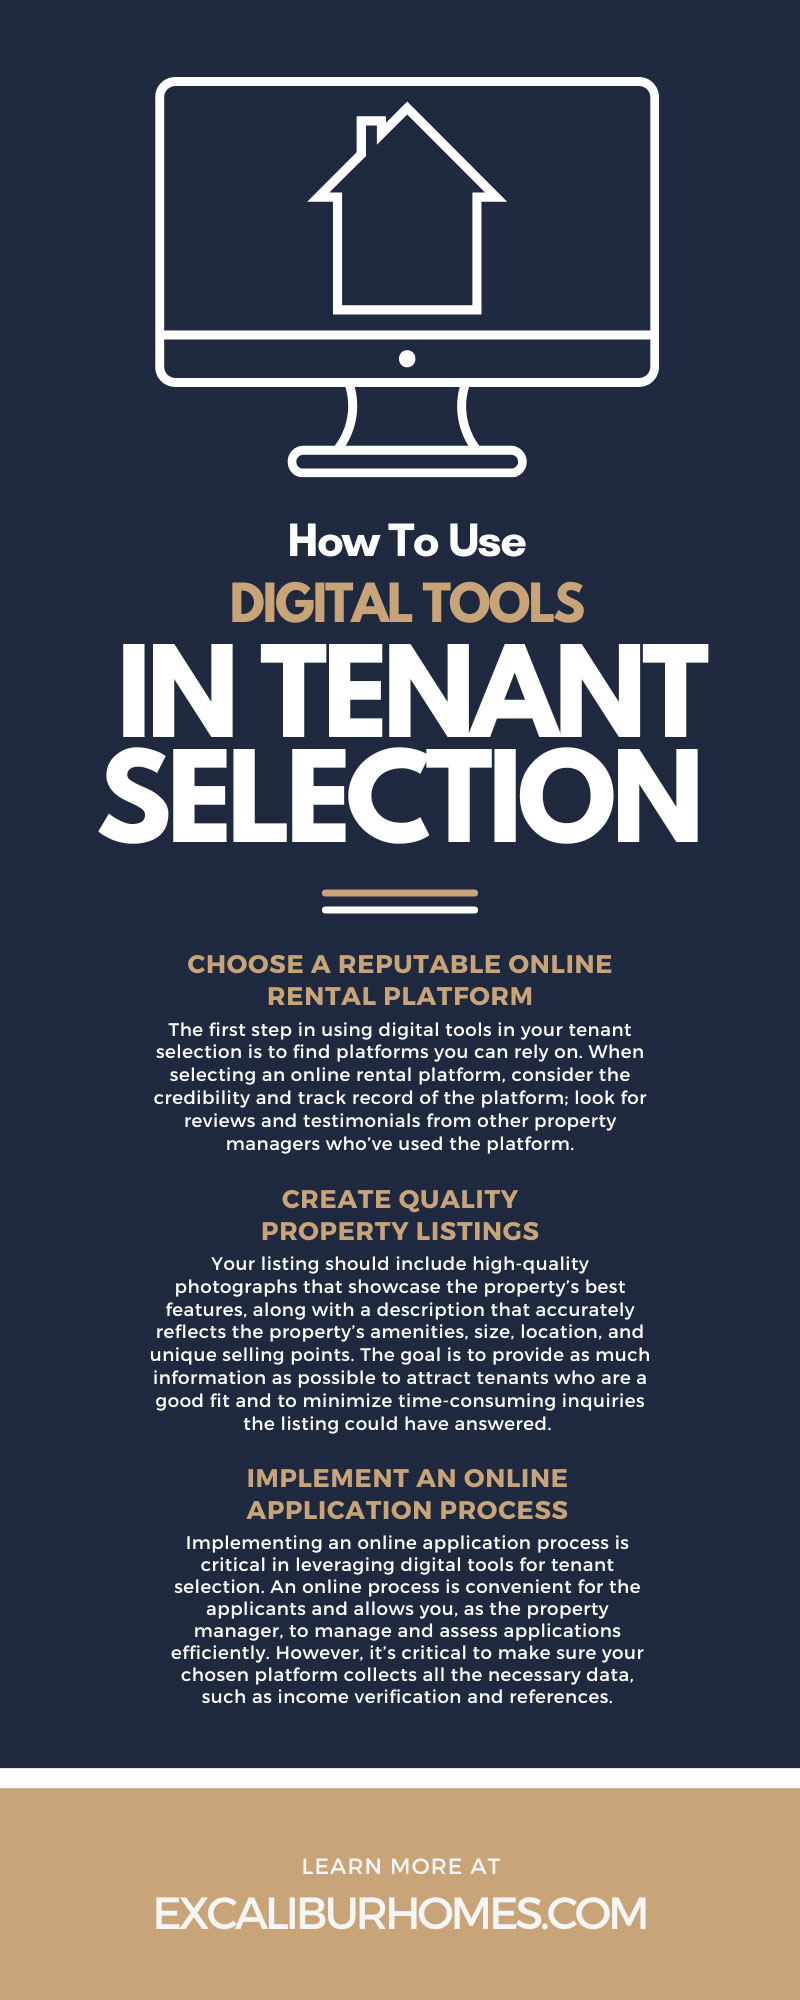 How To Use Digital Tools in Tenant Selection 